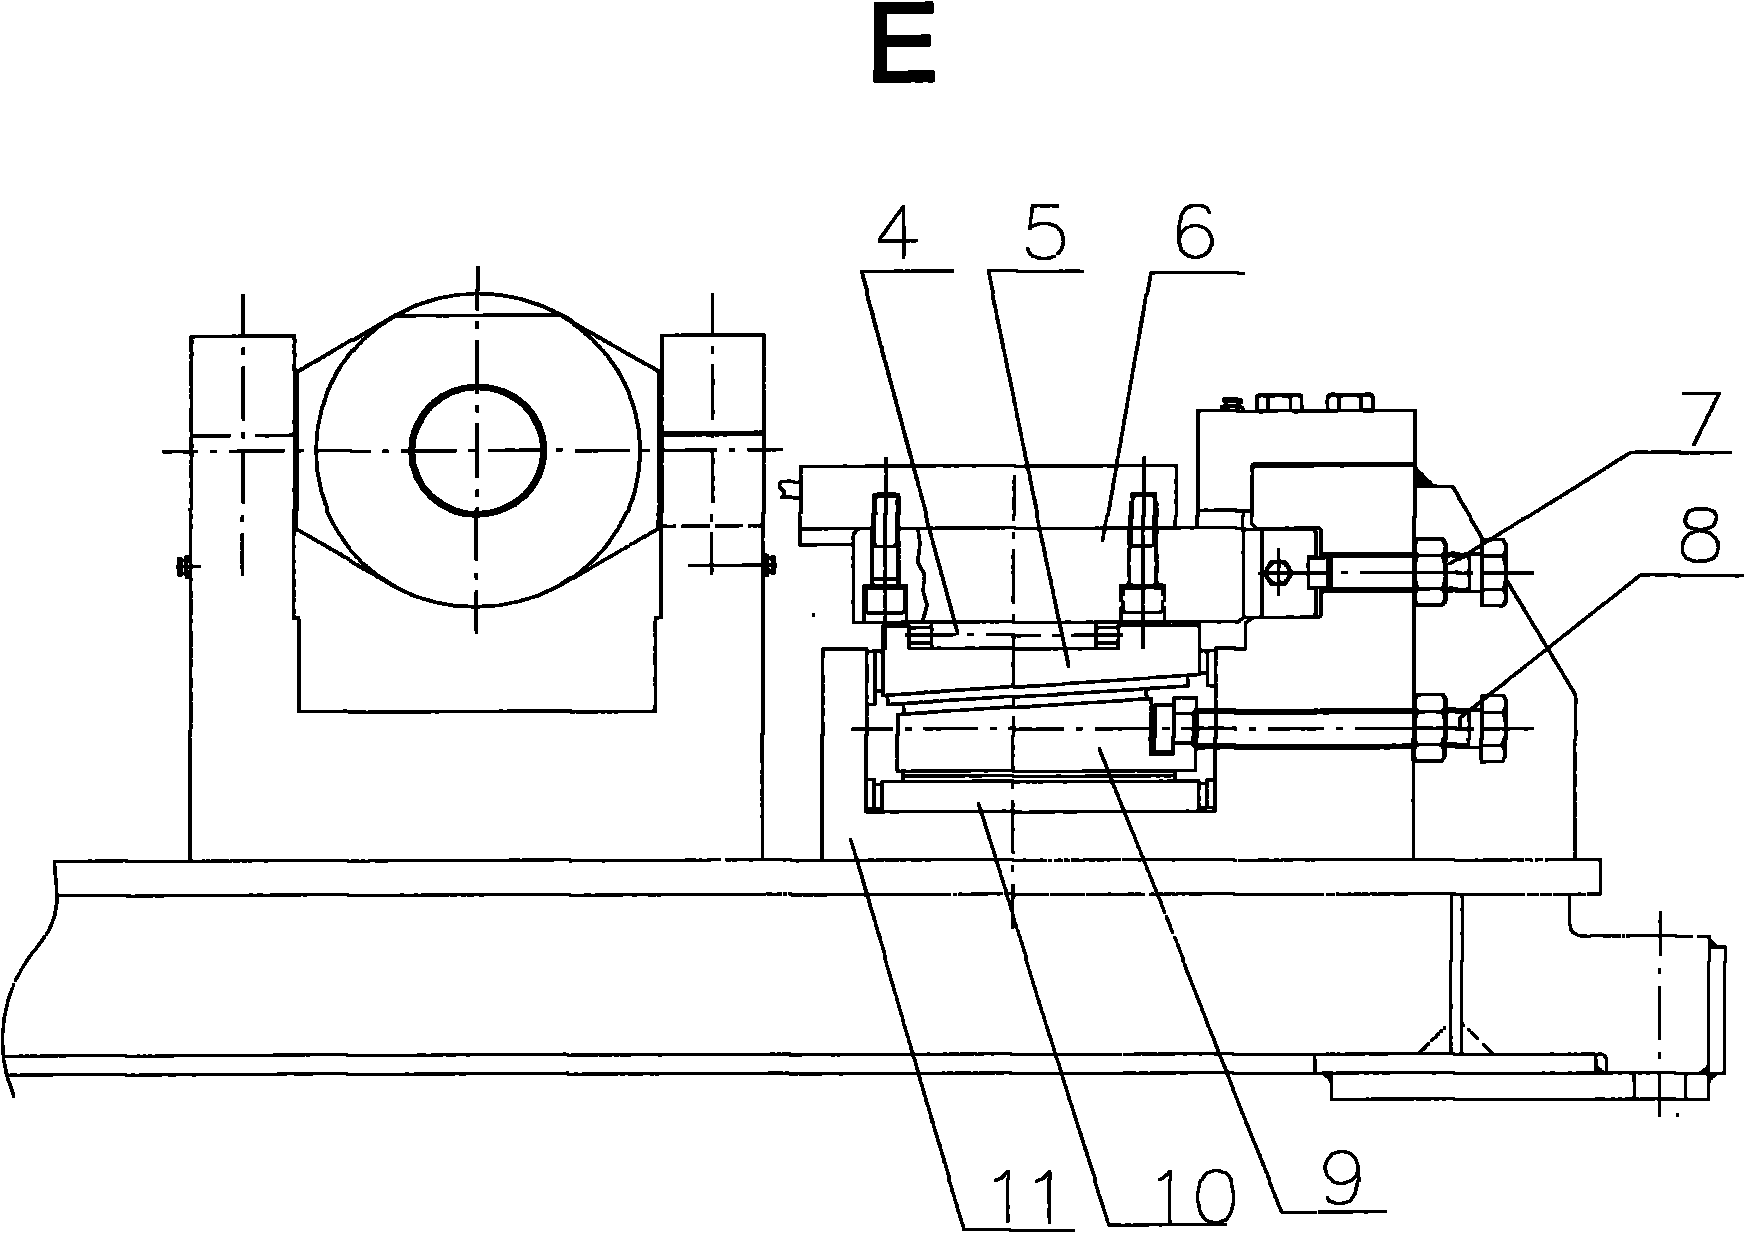 Coiling machine capable of adjusting levelness of reel